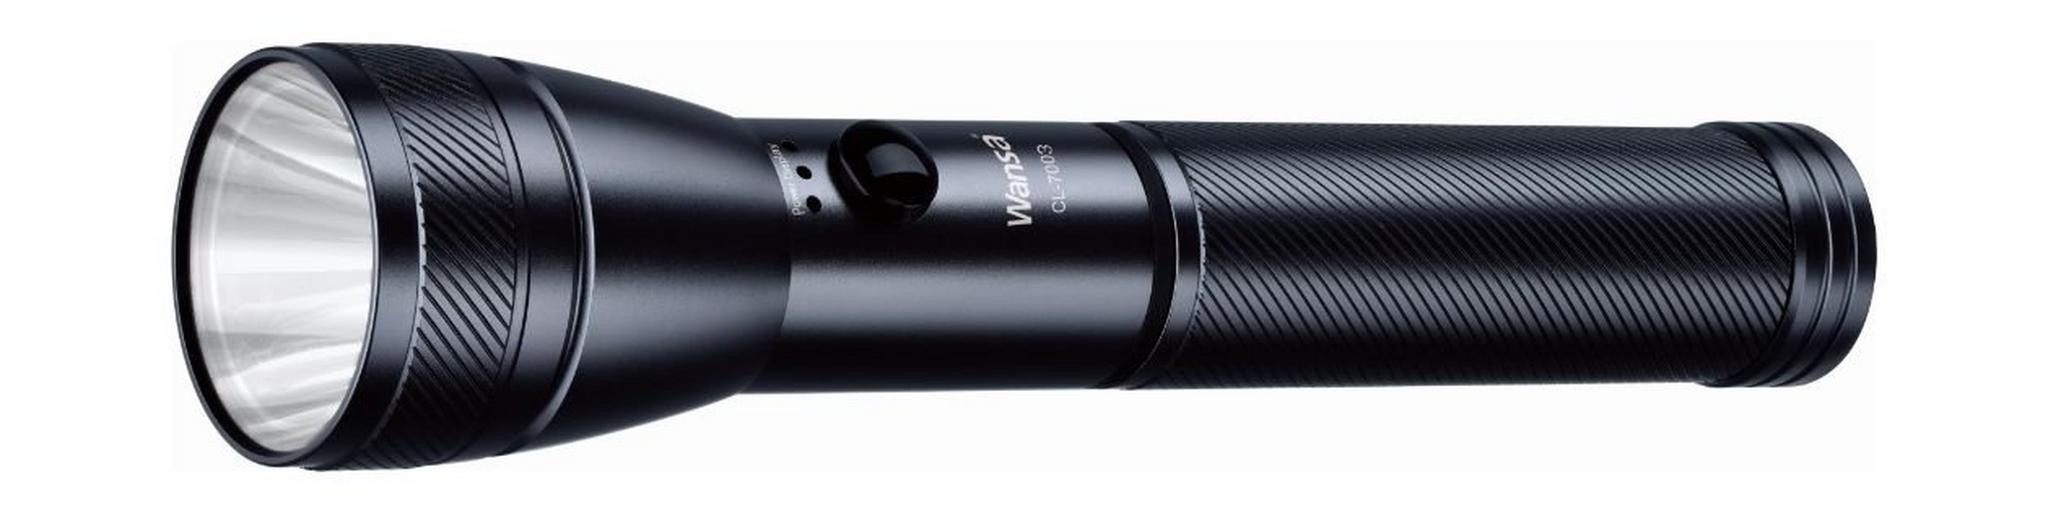 Wansa 3000mAh Rechargeable LED Torch with Power Bank (CL-7003) – Black